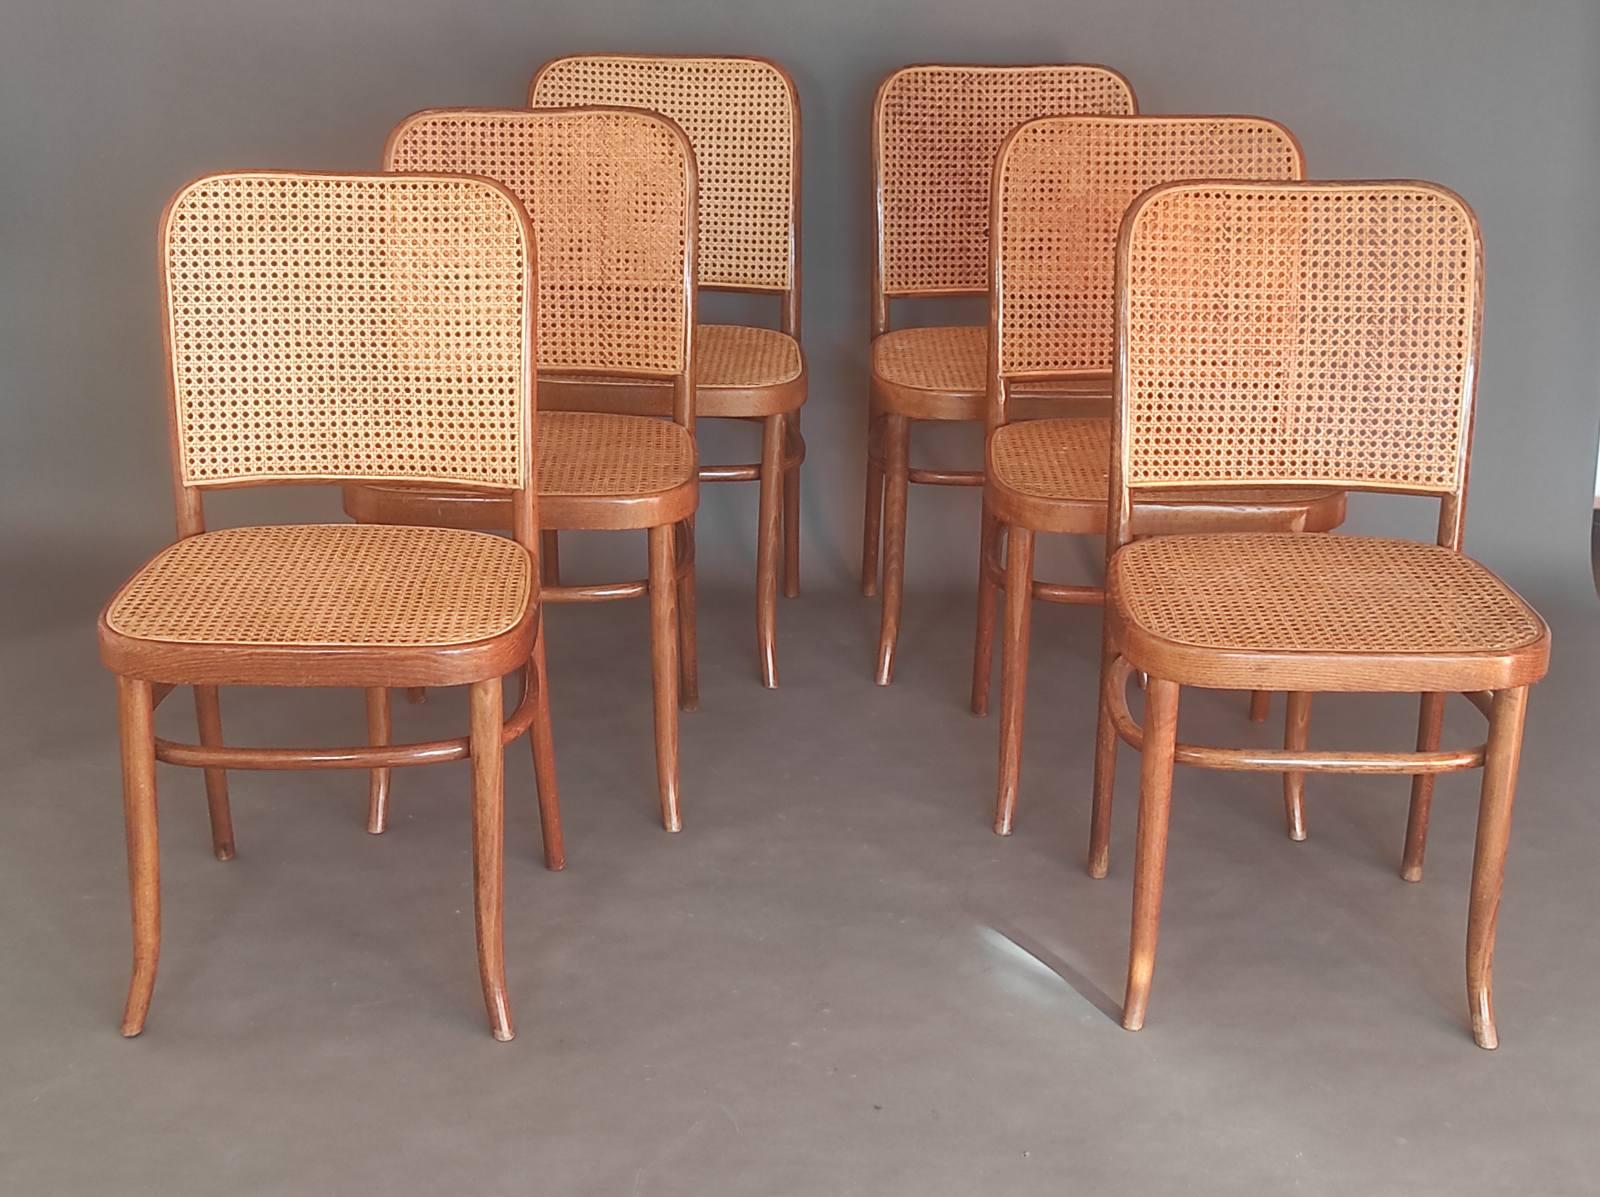 Josef Hoffmann Vintage  Chairs 811 The chairs have not been restored, considering the period of production, the condition is more than good. The chairs were produced in the Stol Kamnik factory in the 1950s.